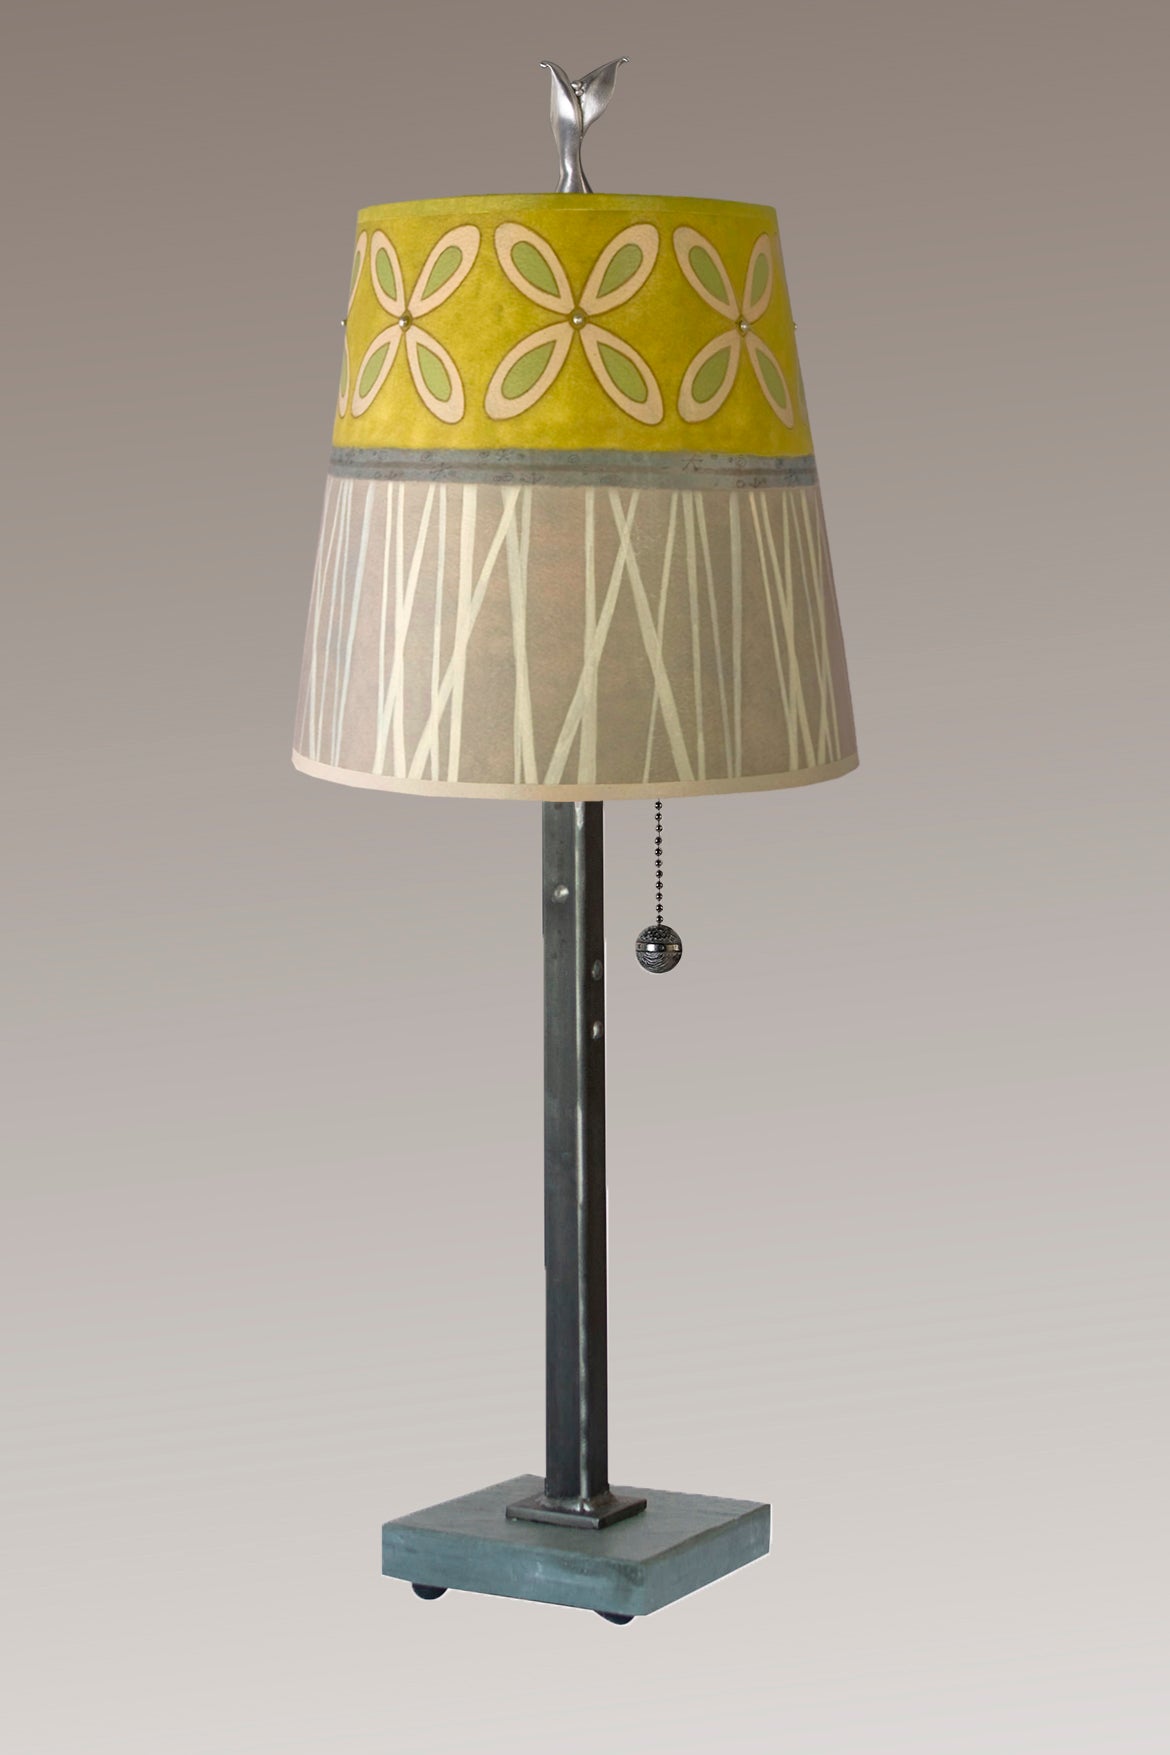 Janna Ugone & Co Table Lamps Steel Table Lamp with Small Drum Shade in Kiwi